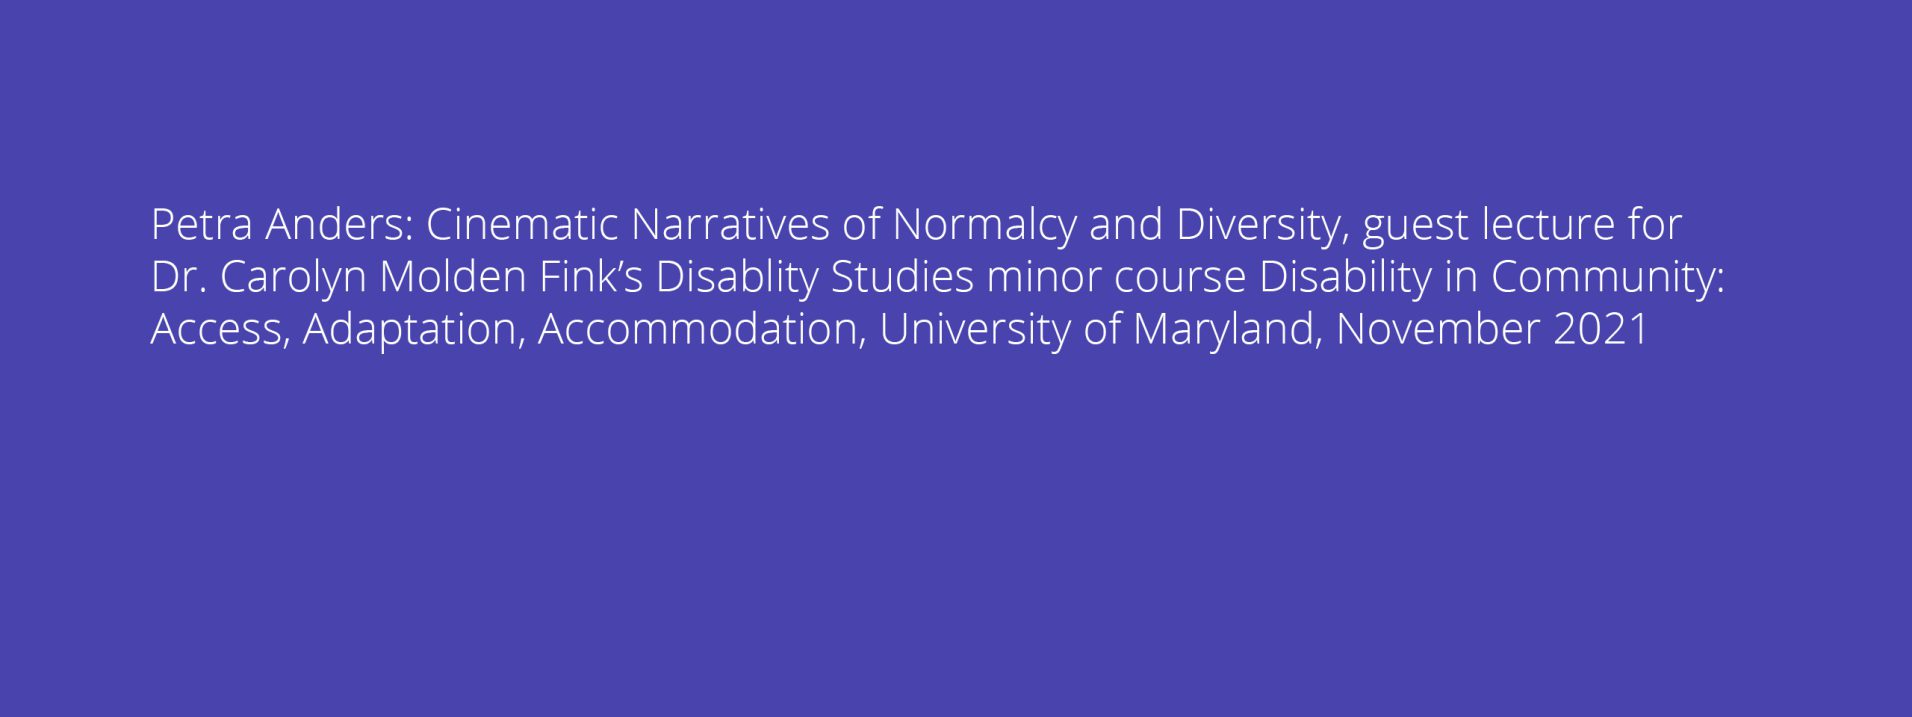 Petra Anders: Cinematic Narratives of Normalcy and Diversity, guest lecture for Dr. Carolyn Molden Fink’s Disablity Studies minor course Disability in Community: Access, Adaptation, Accommodation, University of Maryland, November 2021